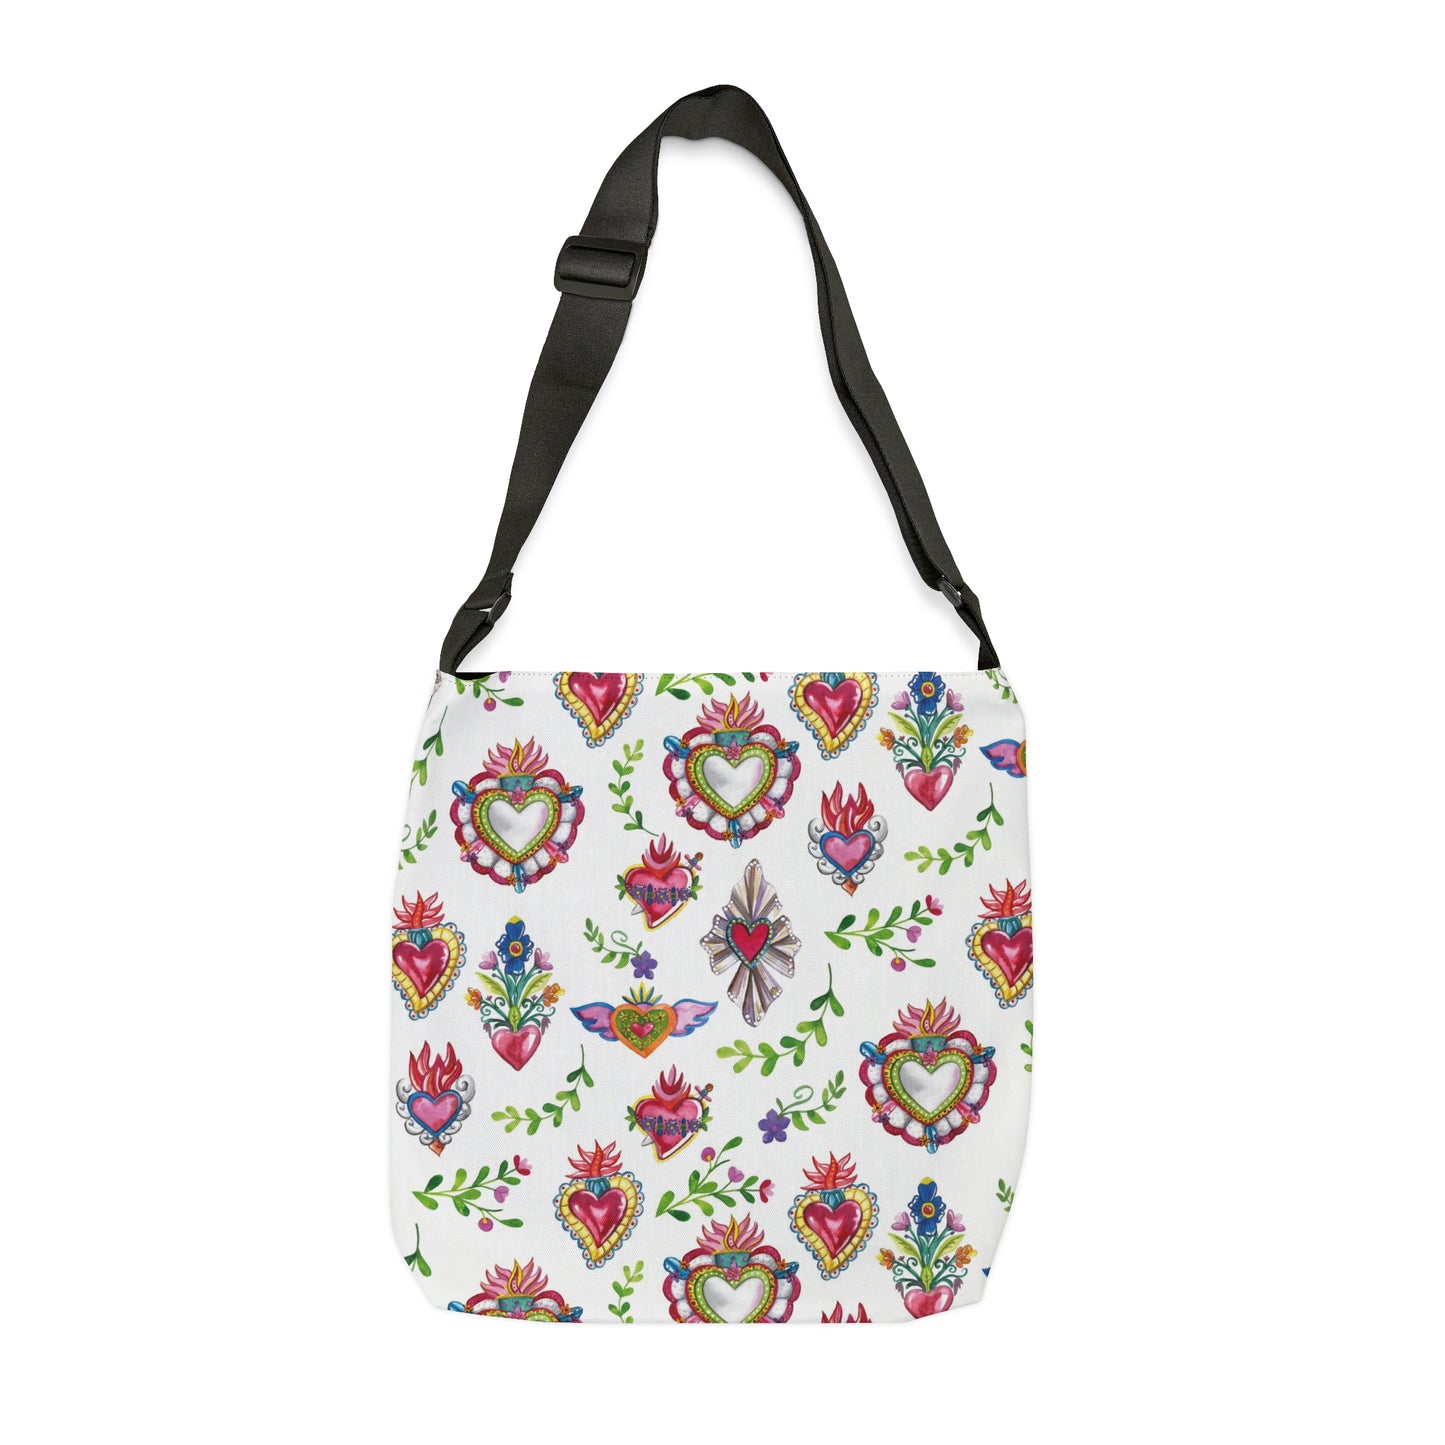 Sagrado corazon Adjustable Tote Bag. Mexican folk bag with zipper and pockets. sacred heart With plant leaves.